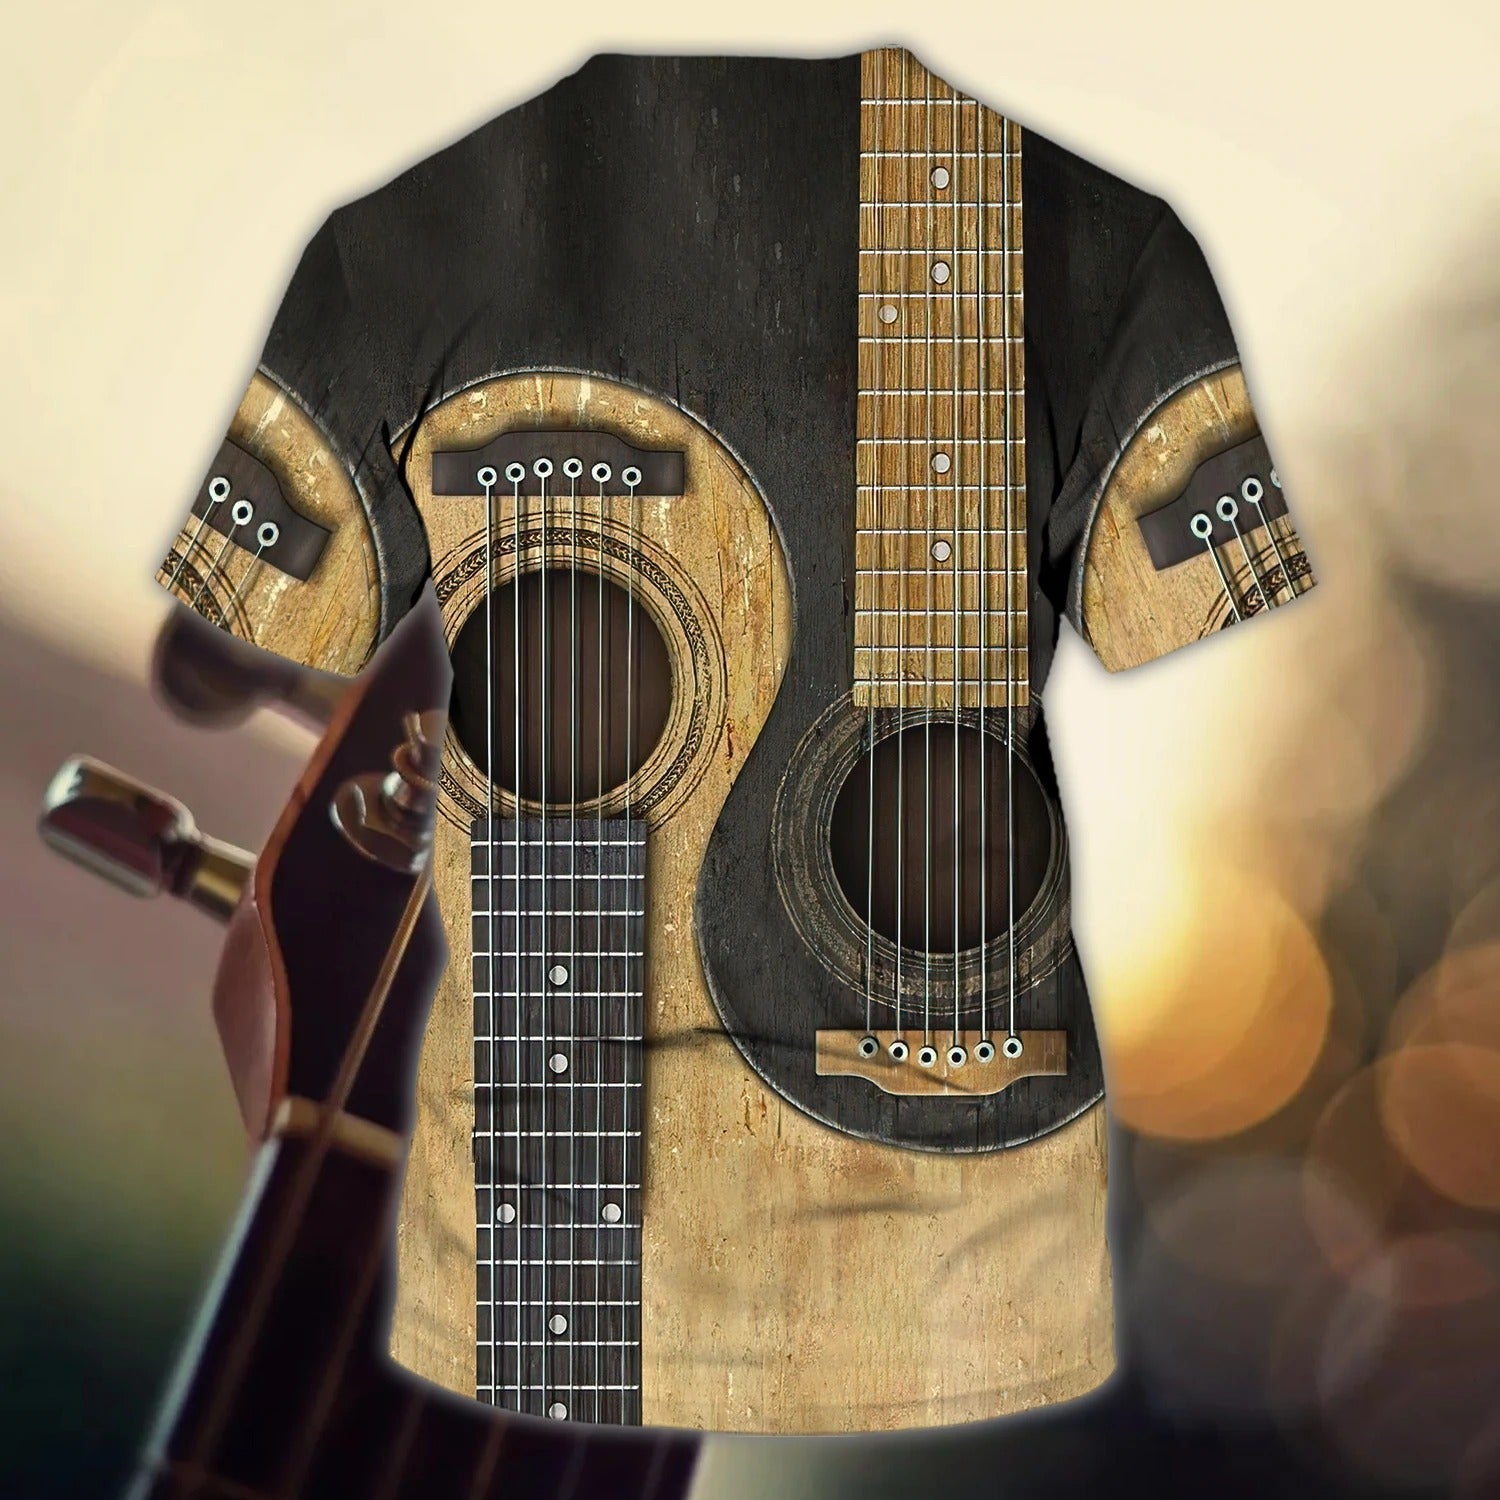 Personalized 3D All Over Printing Shirt For Guitar Lovers/ Gift For Guitar Lovers/ Sublimation Guitar Shirts